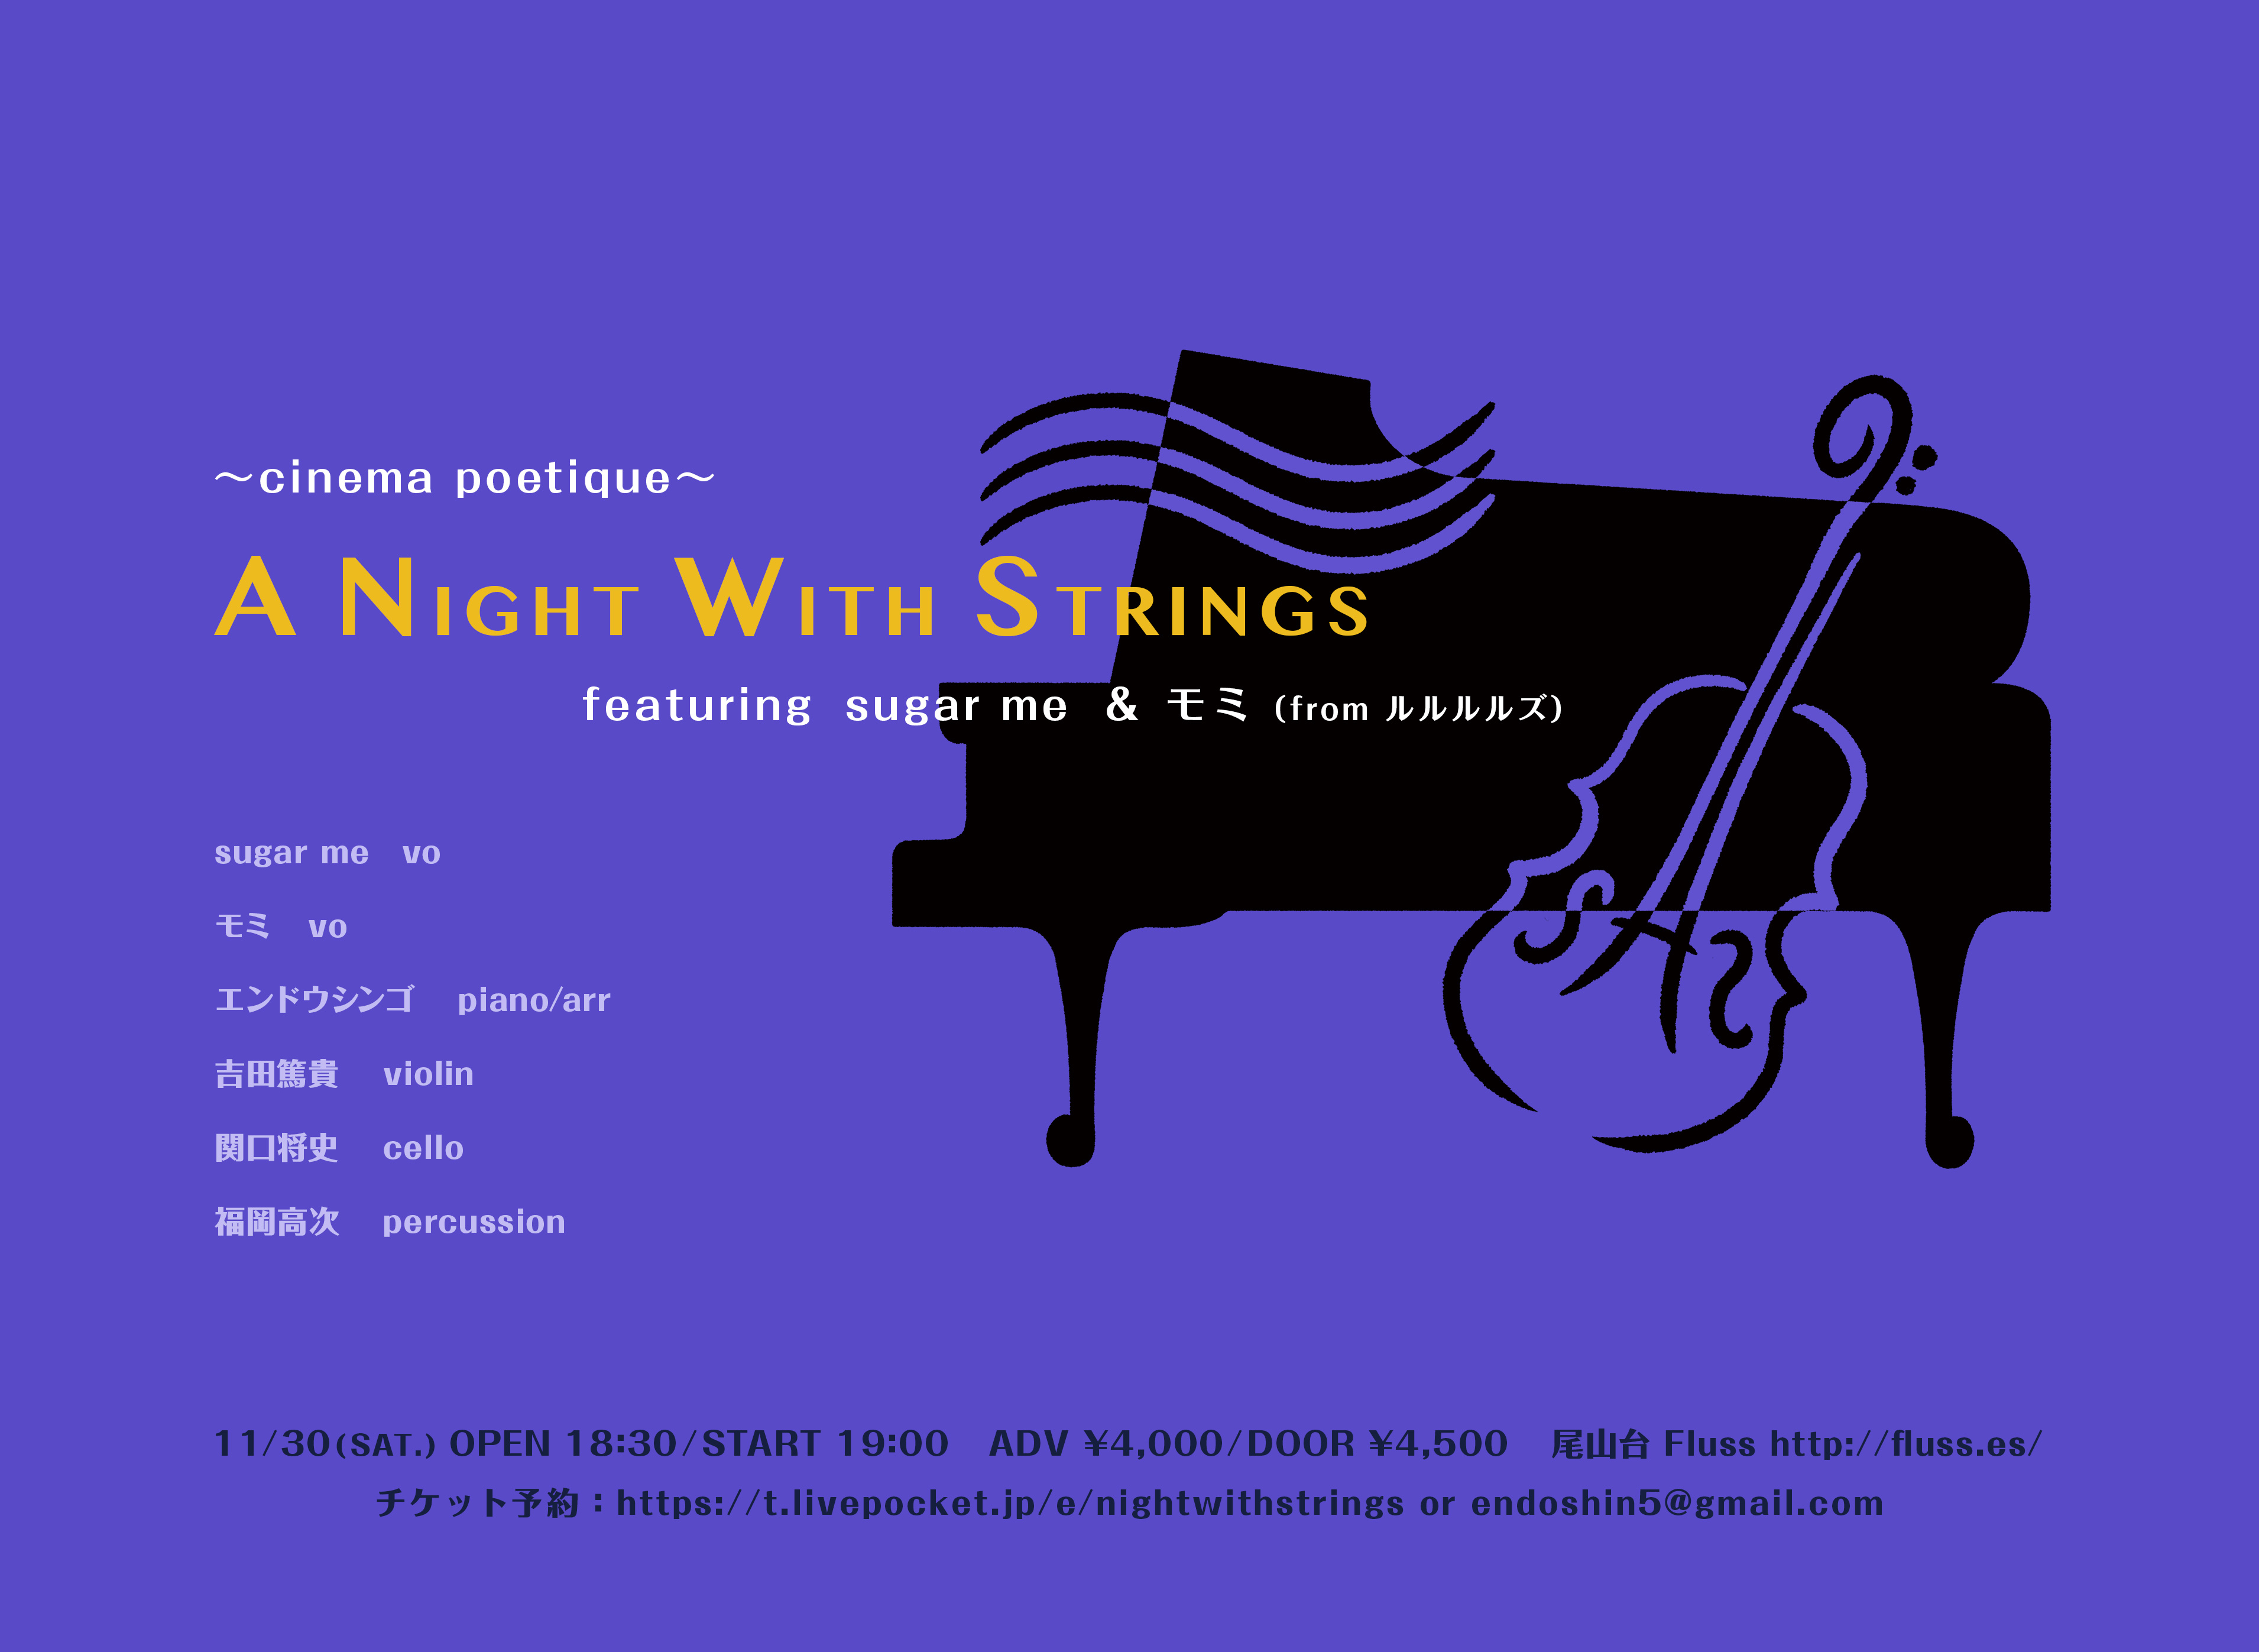 A night with strings  ~cinema poetique~